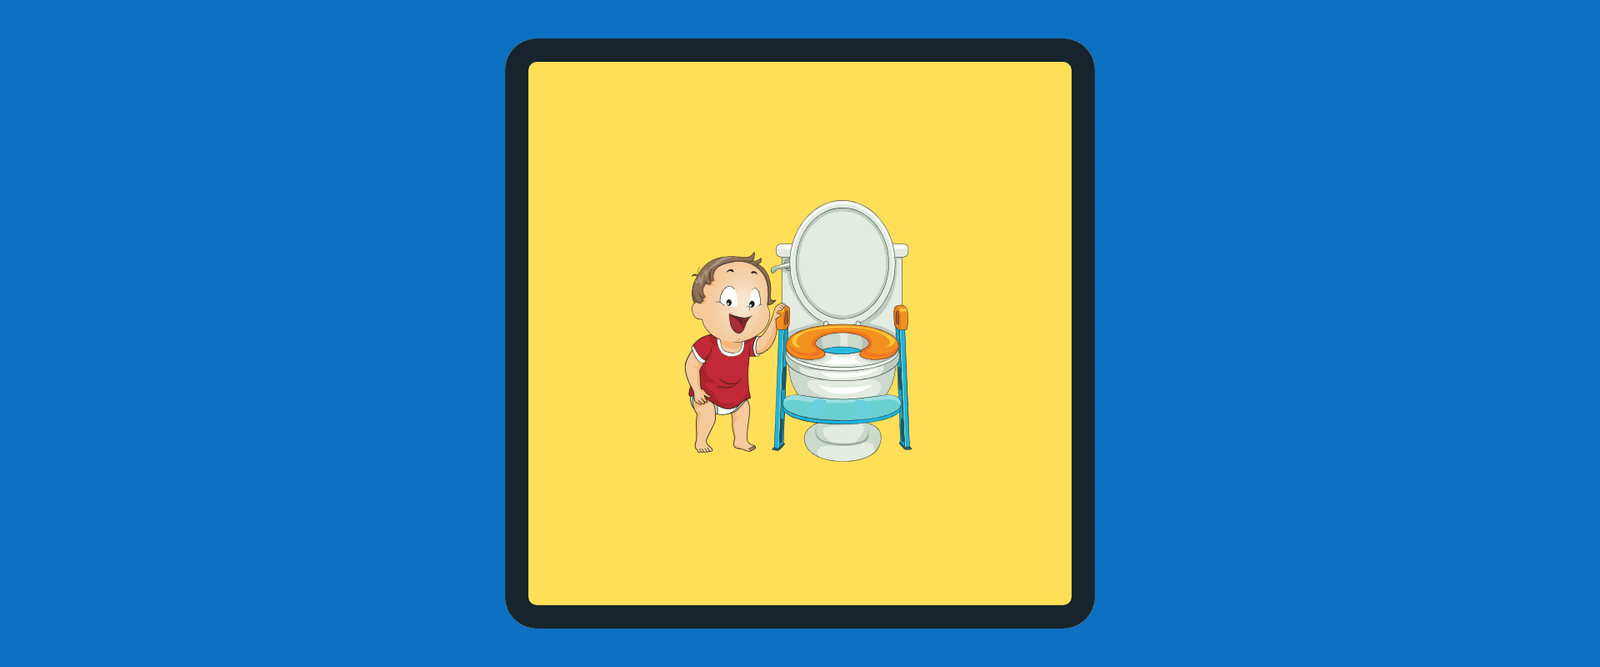 Toilet Training Seats for Toddlers